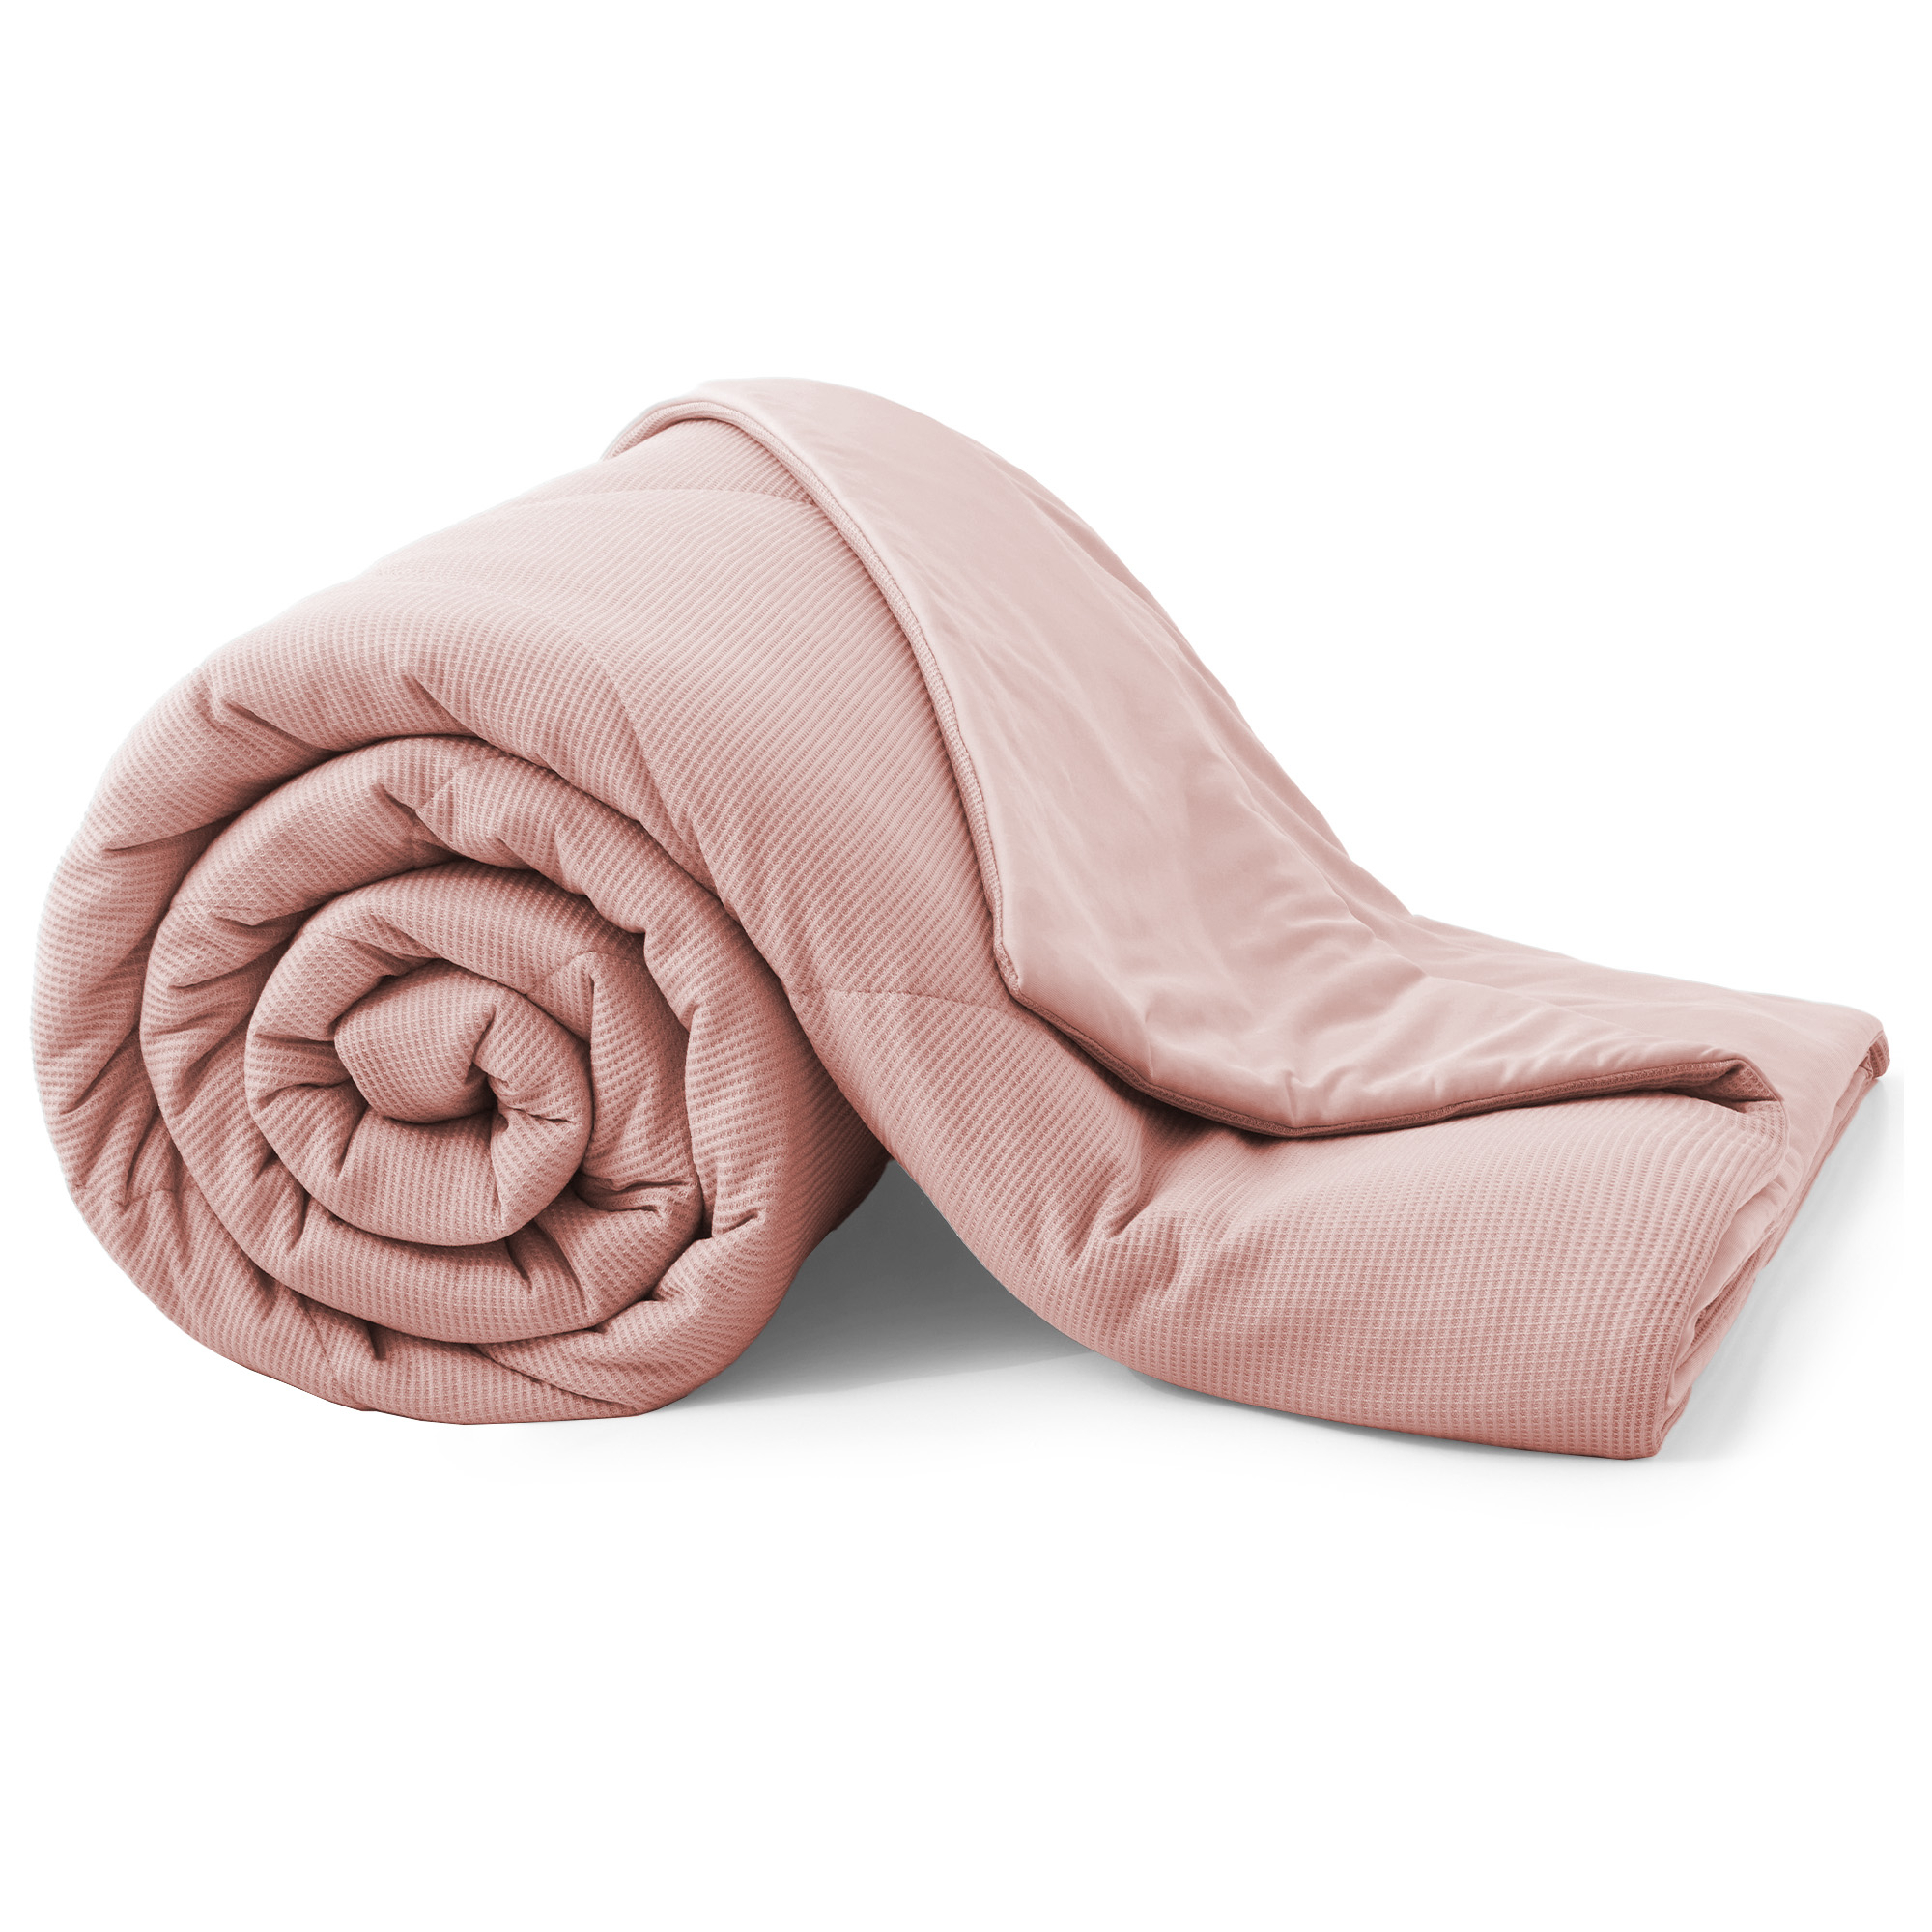 Oversize Blanket, 90 X 90 Queen Size Soft Washable Double Sided Blanket For All Season, Pink